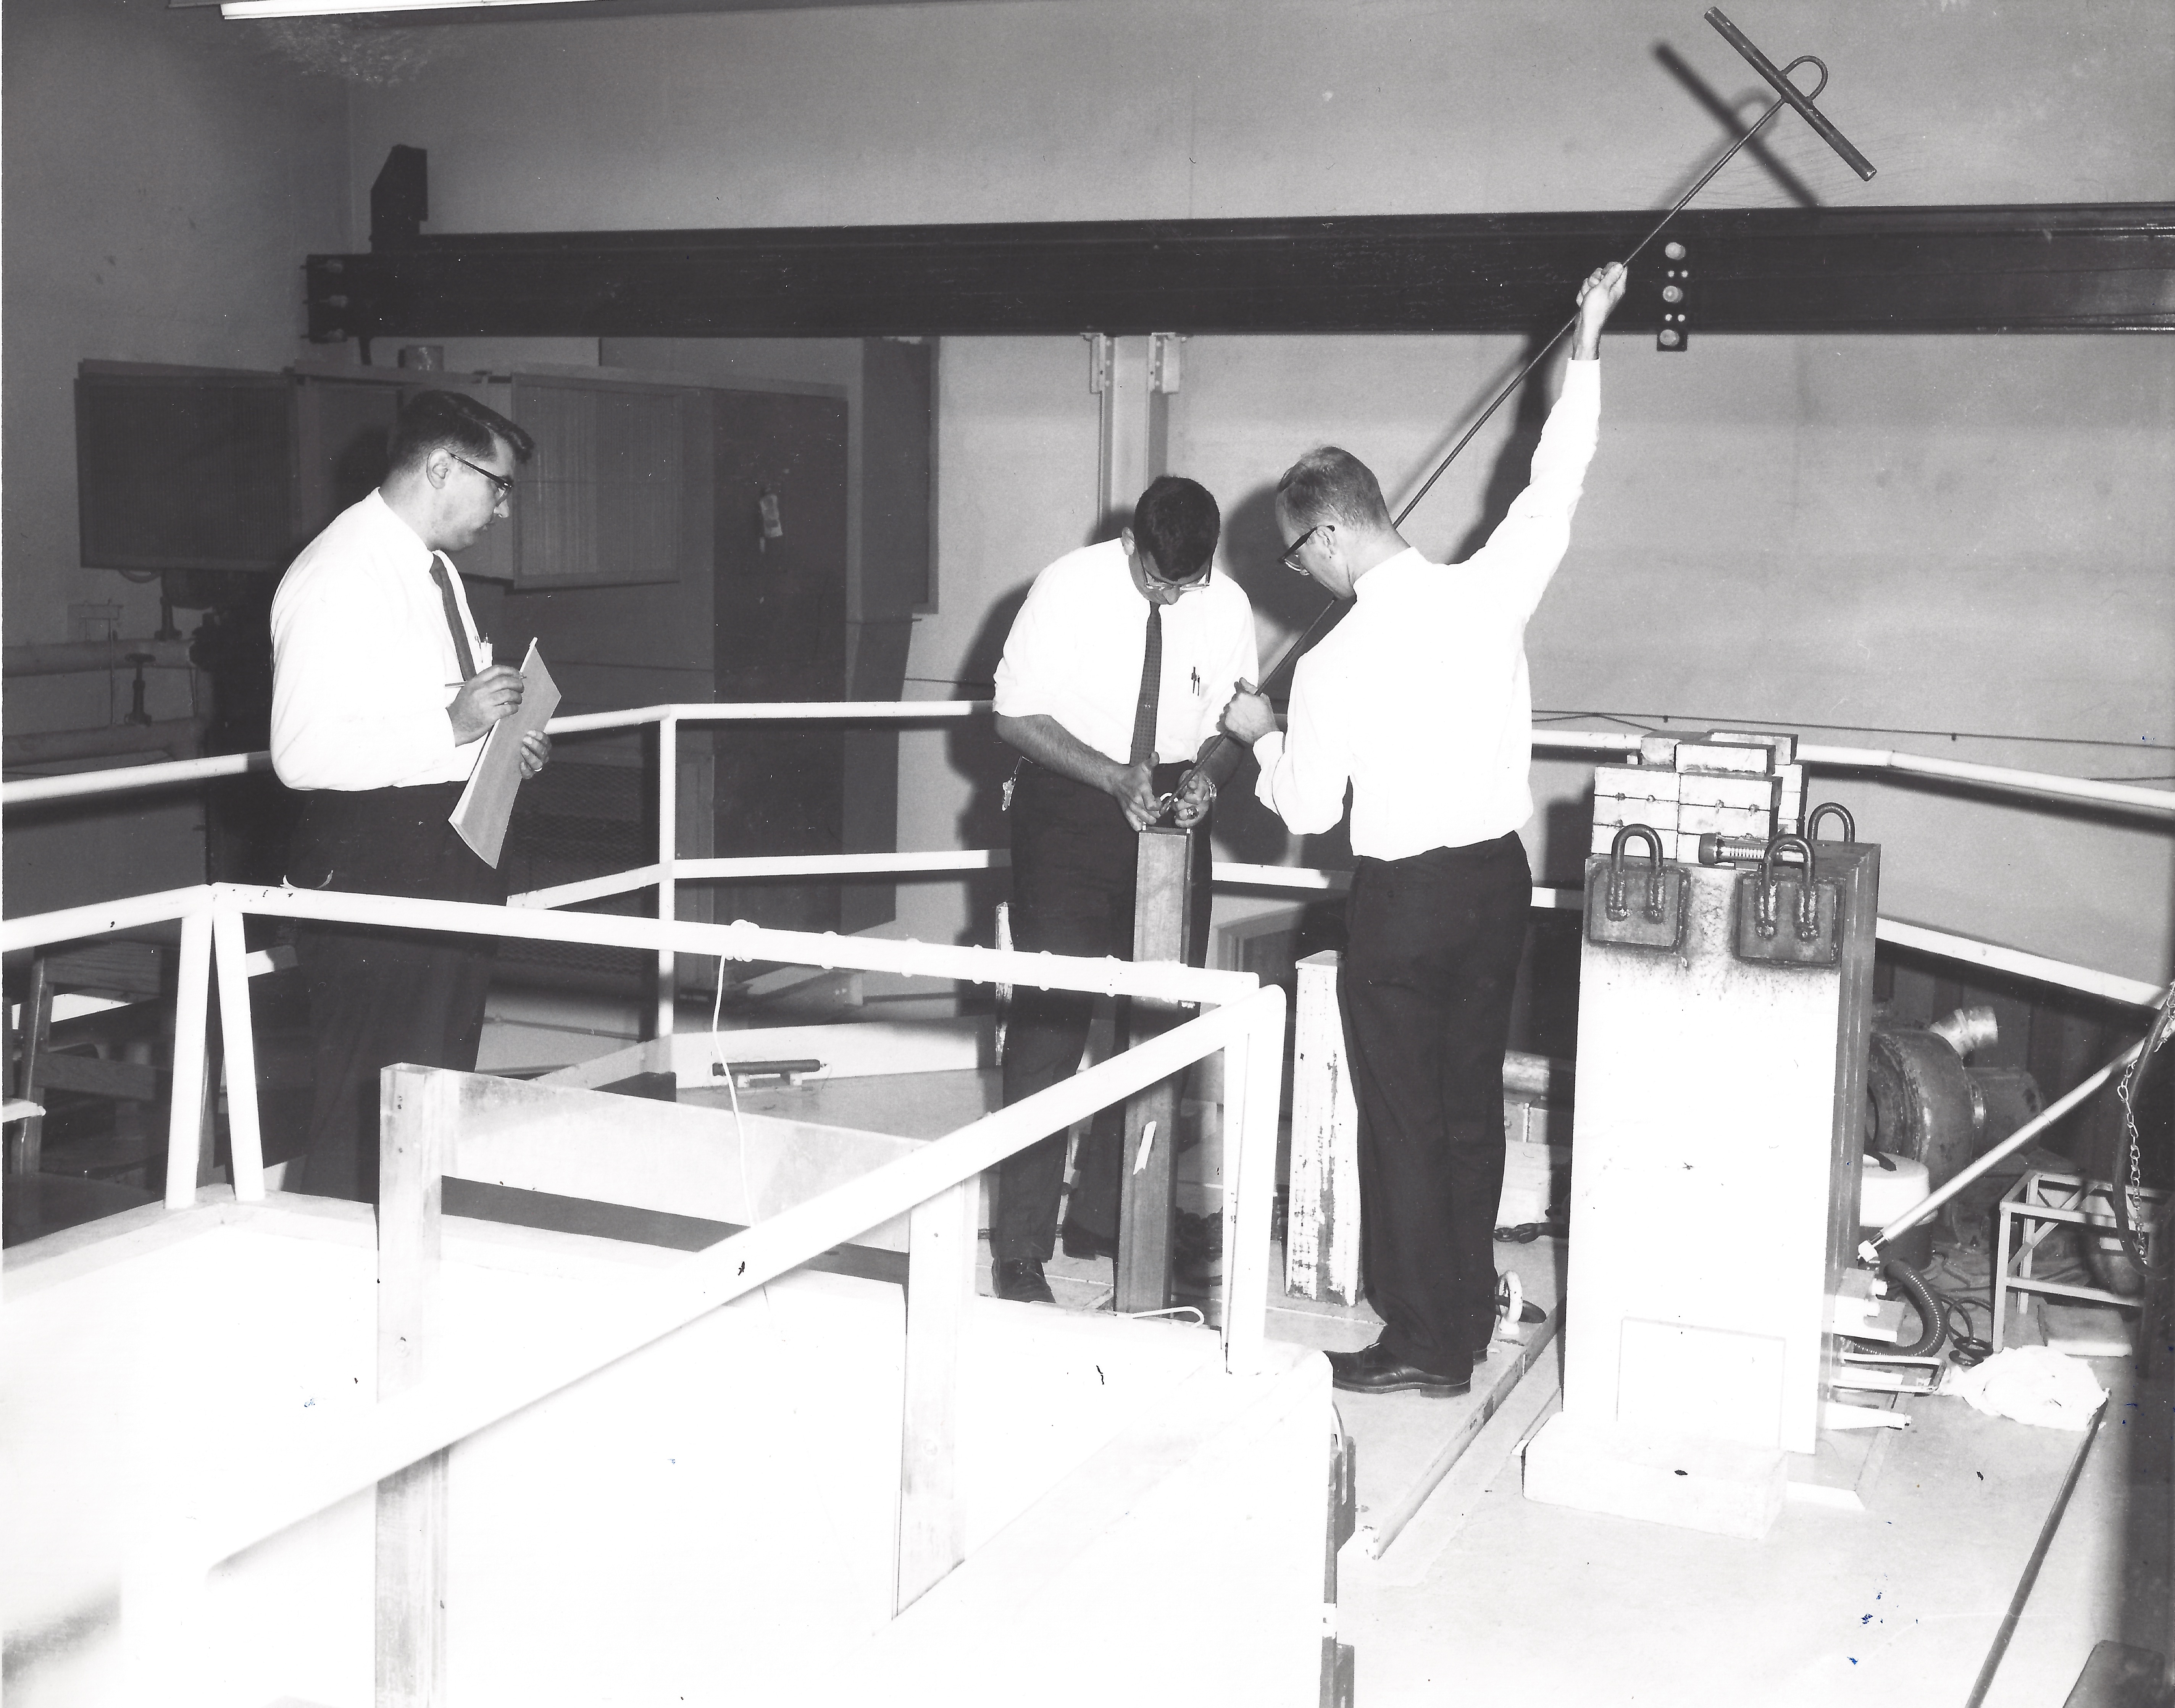 Students working on the Virginia Tech Argonaut Reactor being observed by an instructor, circa 1950s.